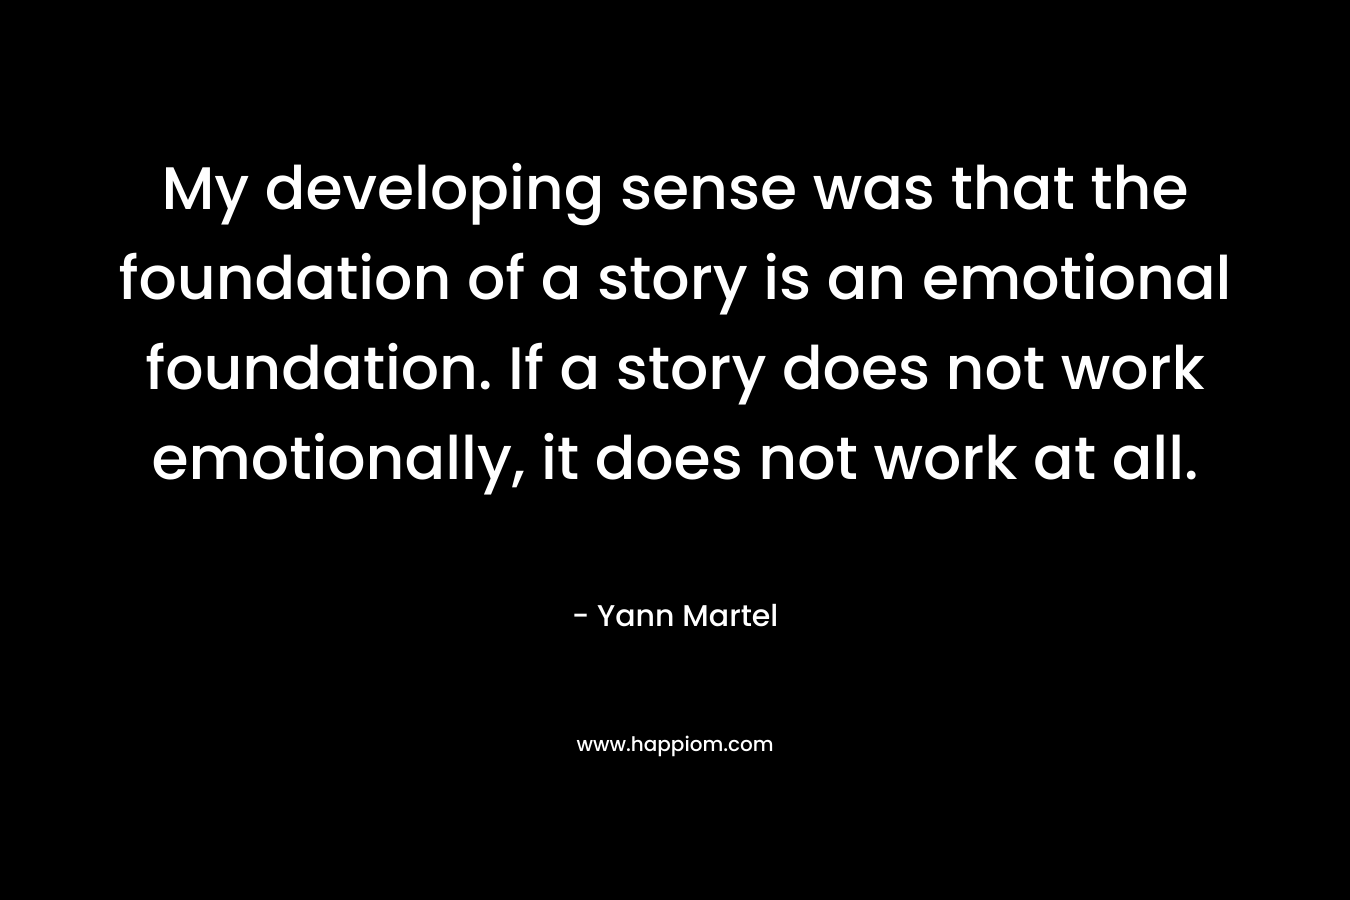 My developing sense was that the foundation of a story is an emotional foundation. If a story does not work emotionally, it does not work at all.